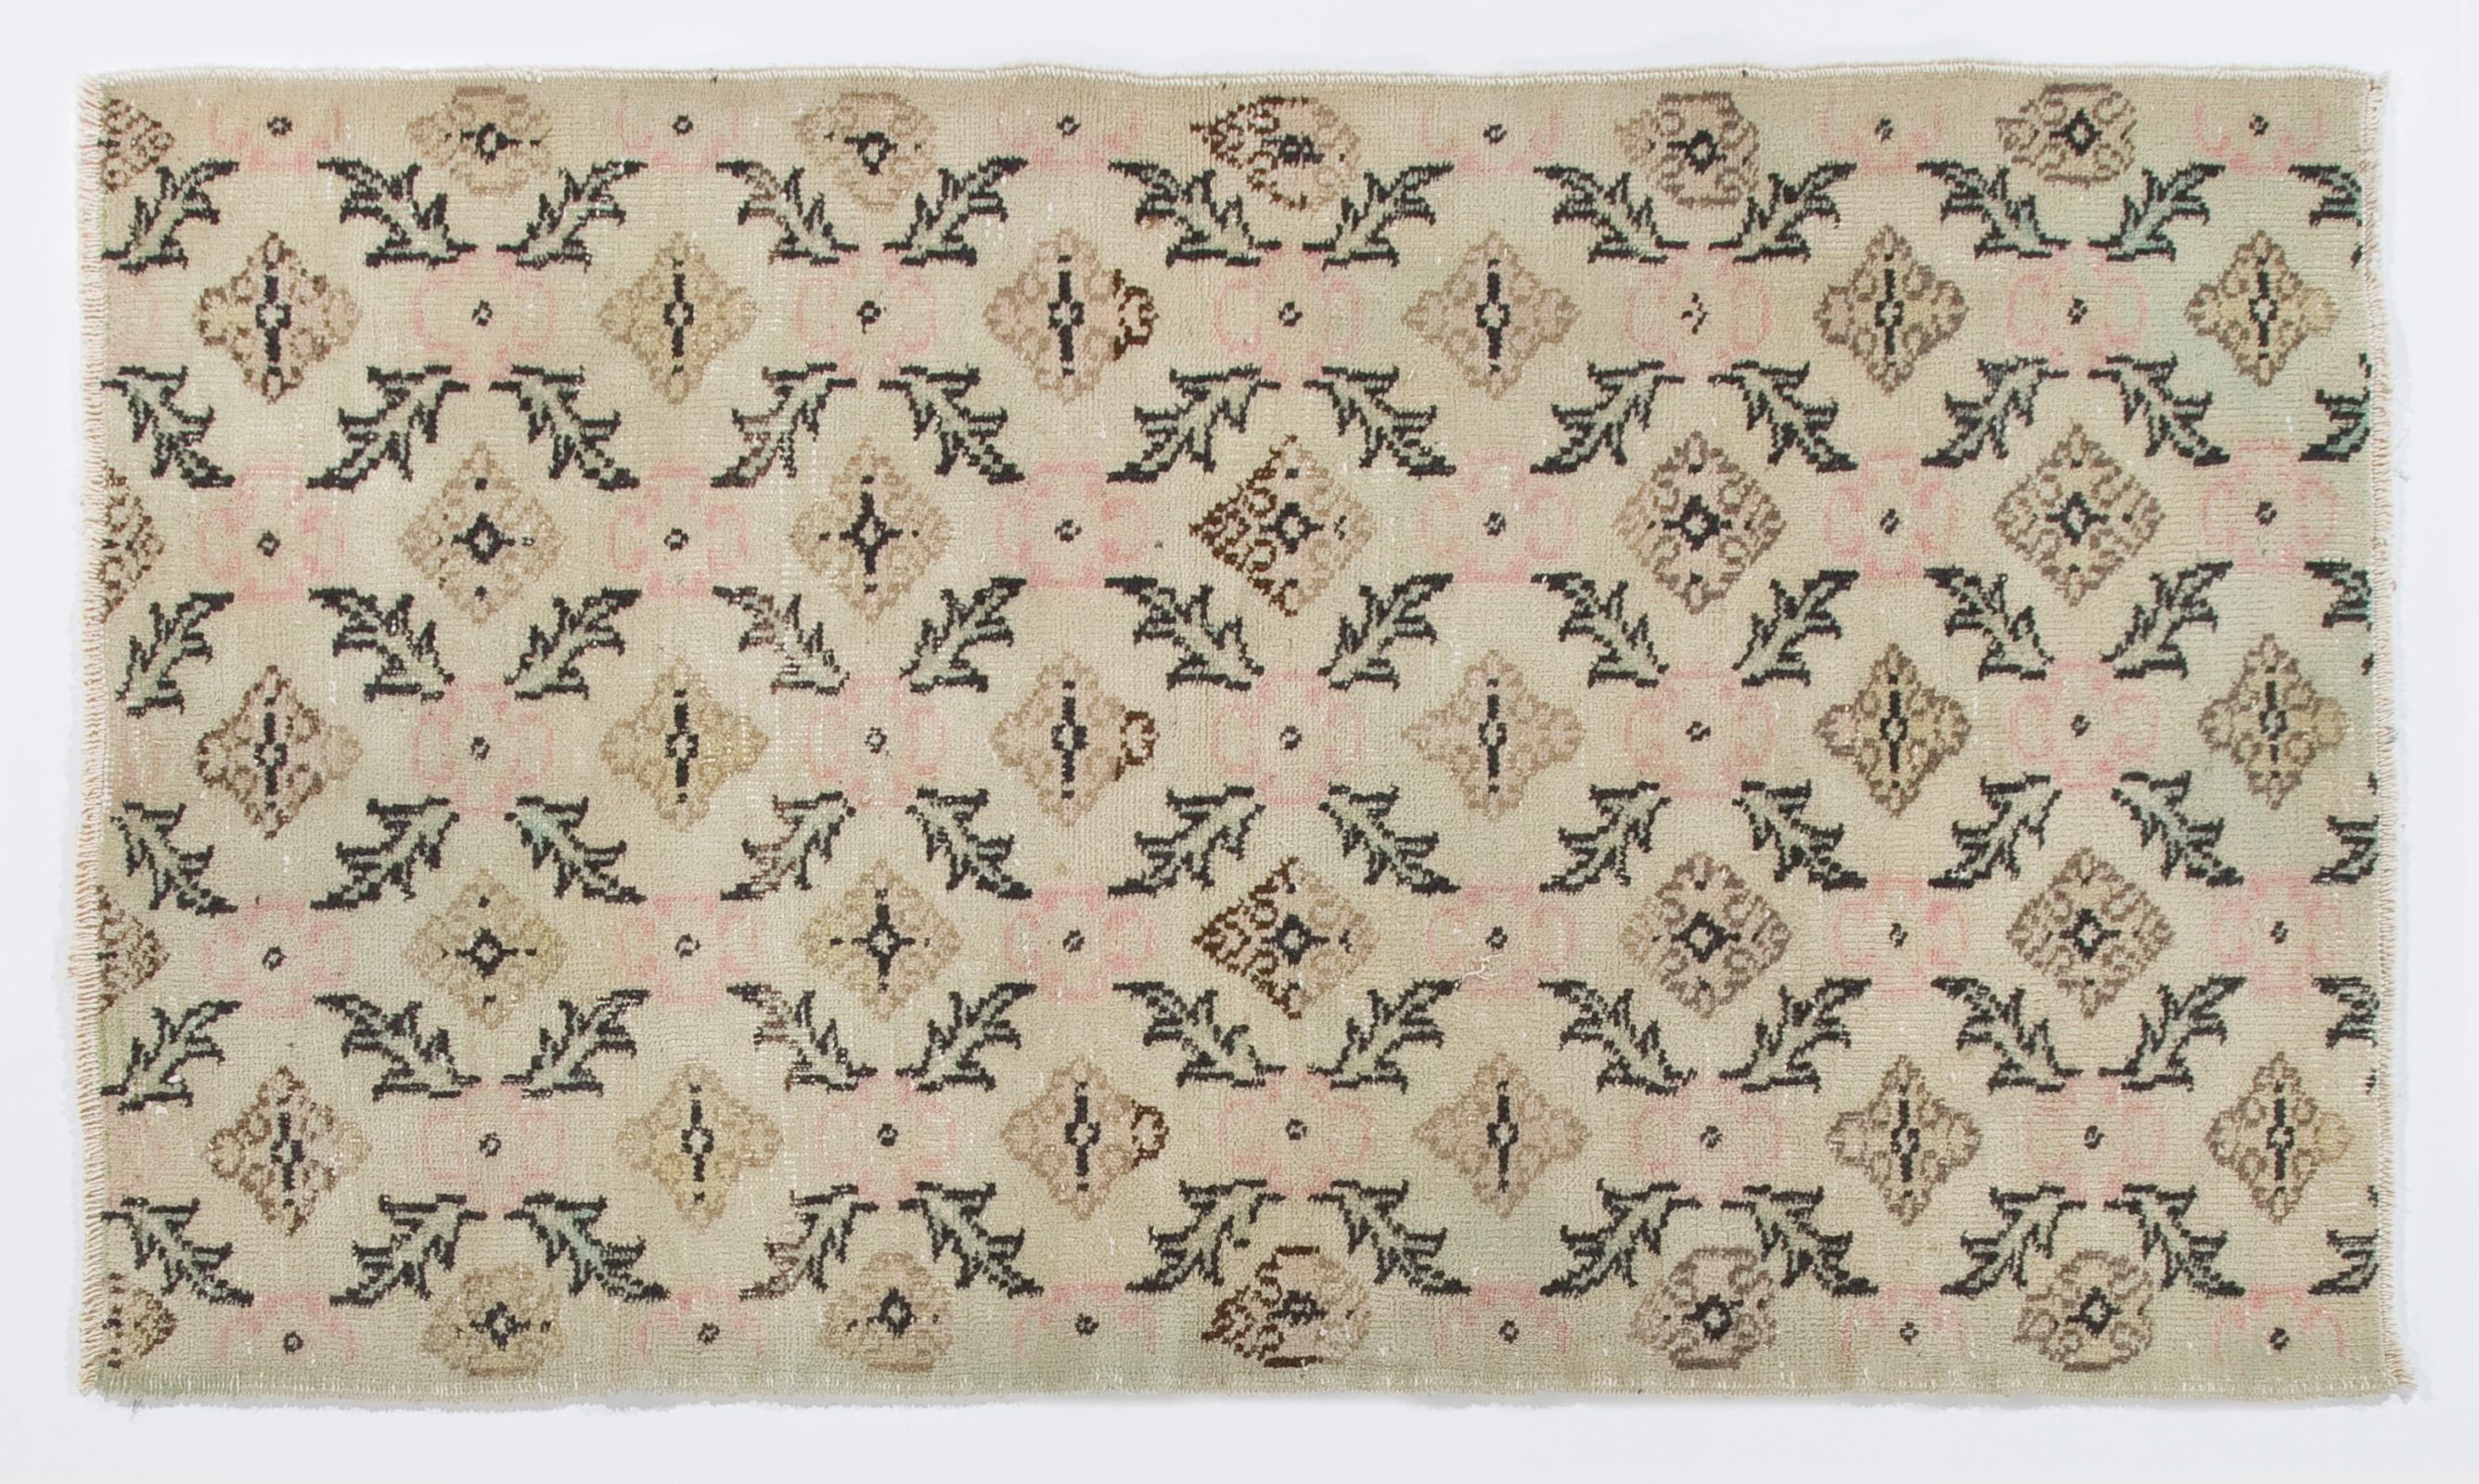 Hand-Knotted 3.8x6.4 Ft Vintage Floral Handmade Rug in Beige, Brown, Black, Green and Pink For Sale